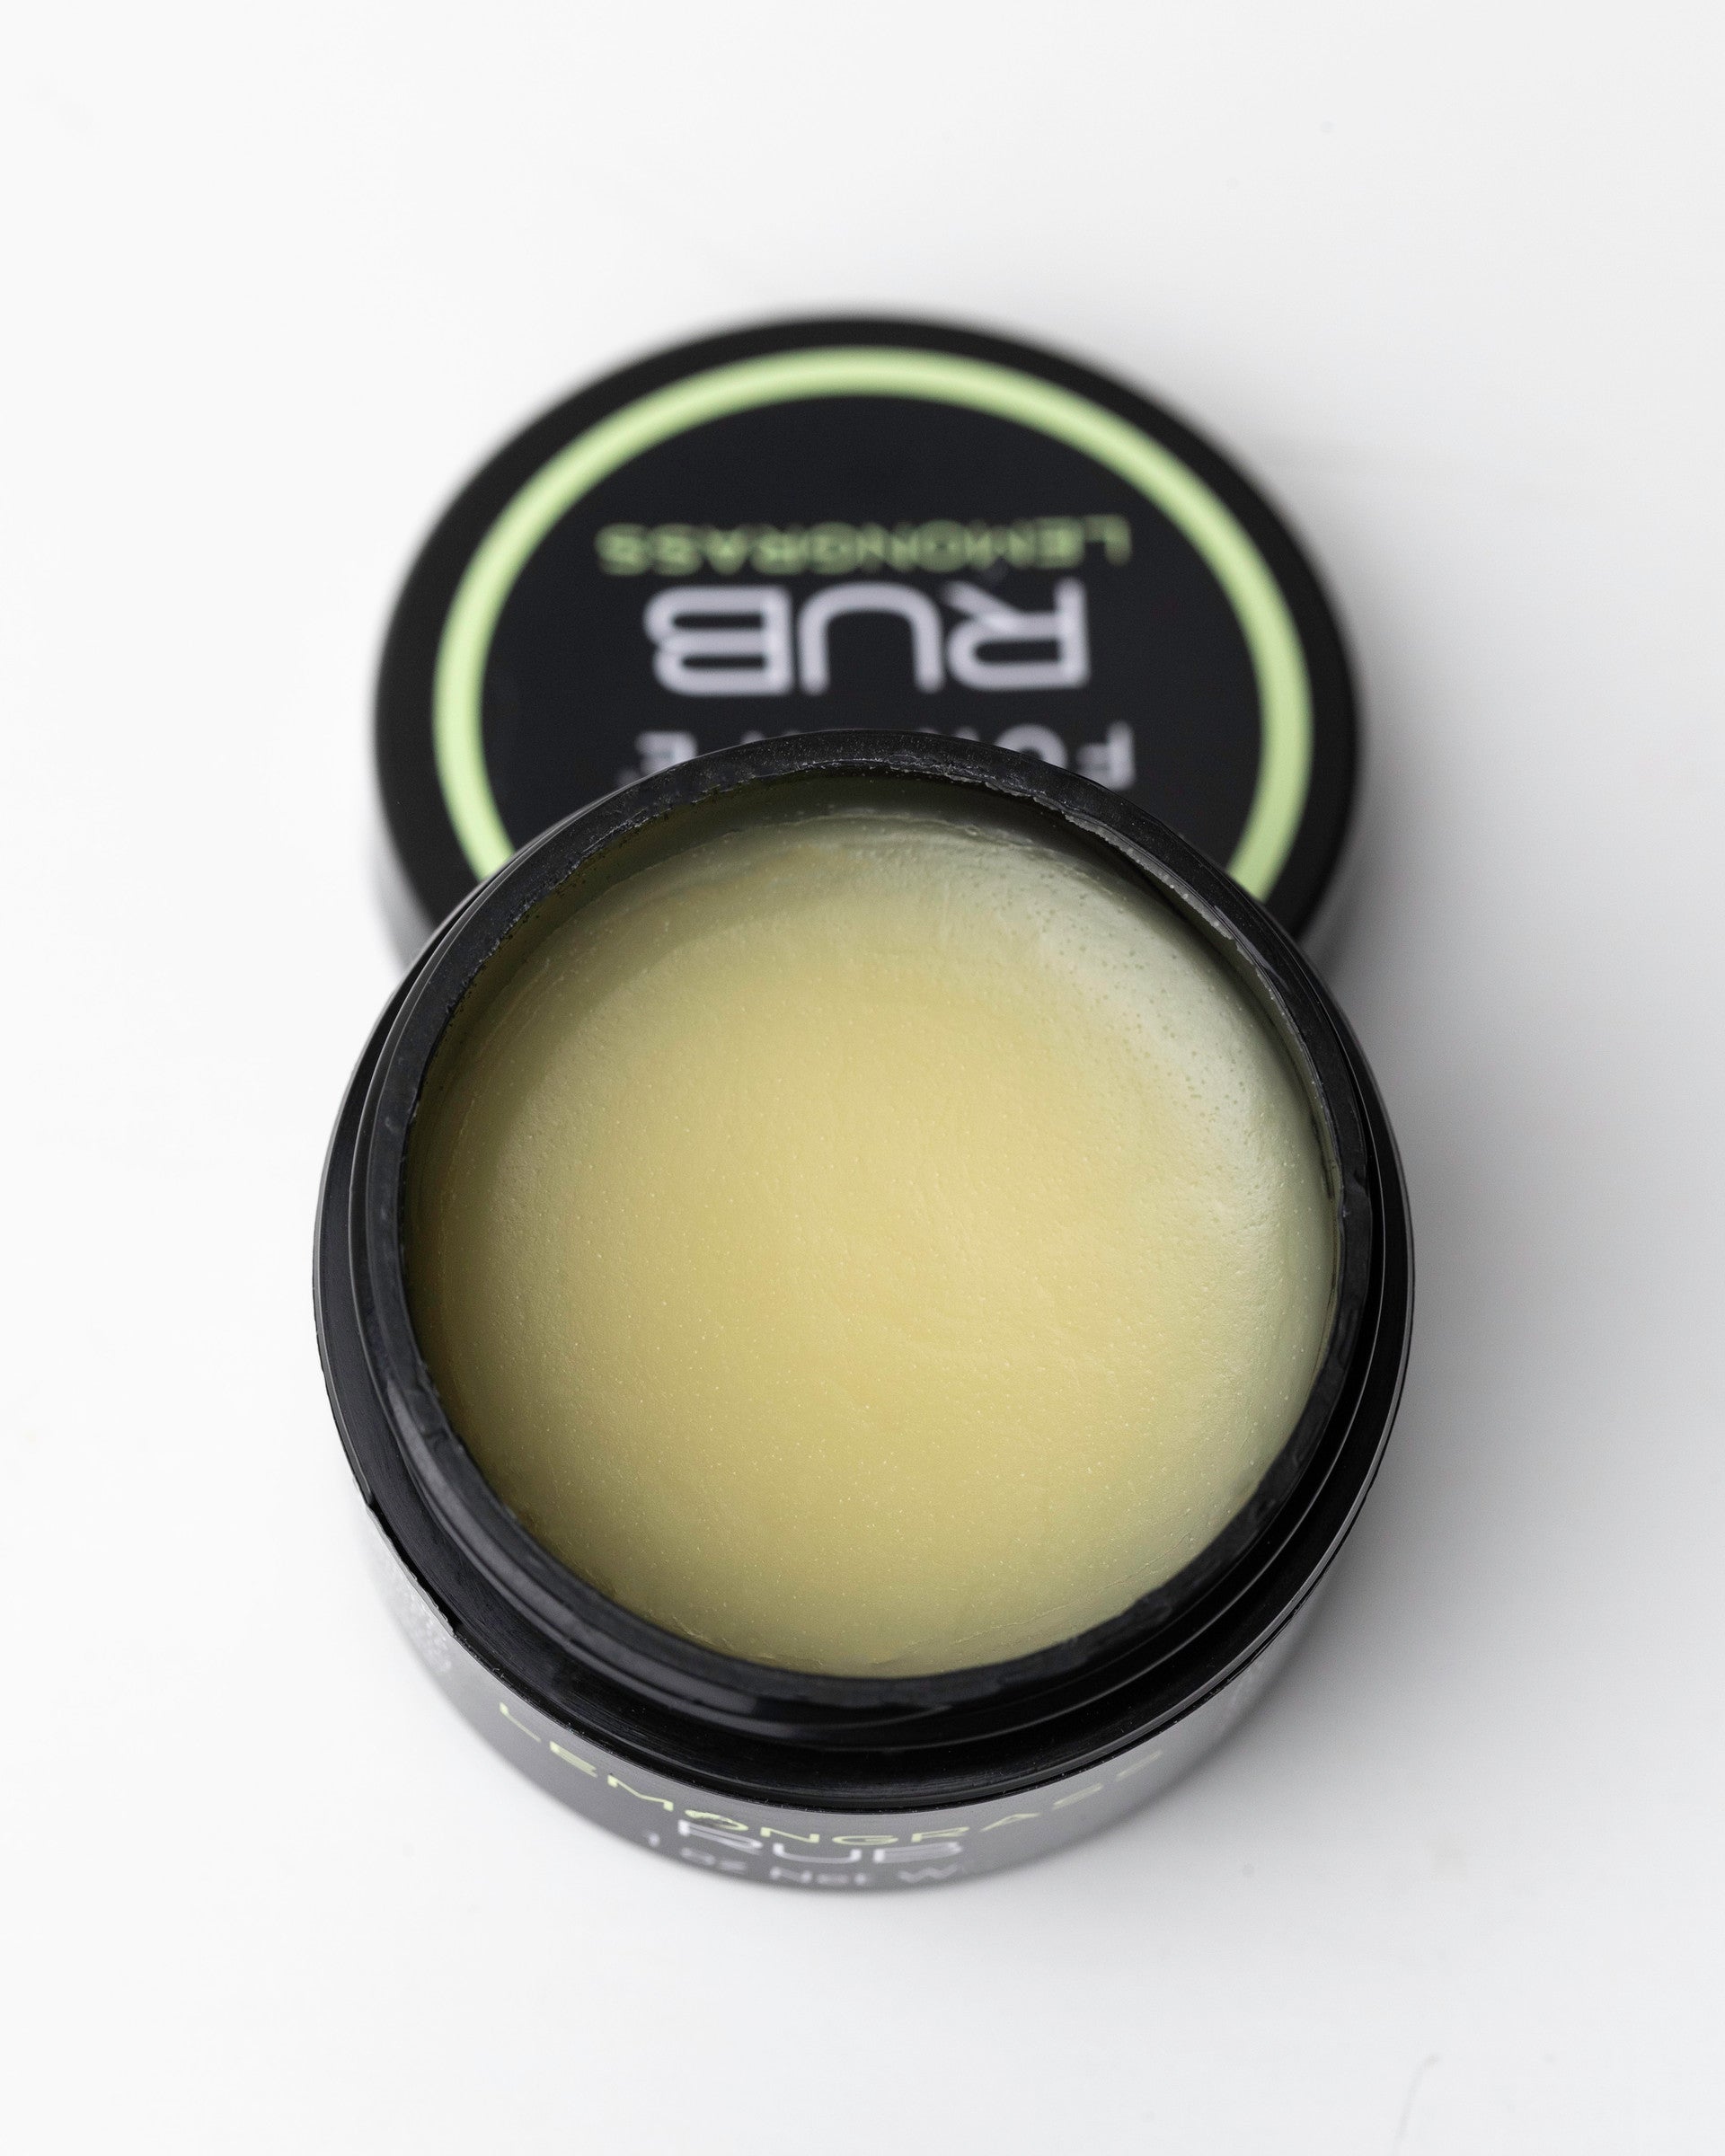 Reduces inflammation causing deep muscle pain and body aches muscle rub. Combines CBD with bees wax, camphor, cajuput oil, menthol, lanolin, cassia oil, eucalyptus oil, mint oil. clove oil. and lemongrass benefits for rapid absorption and deep penetration into the body.